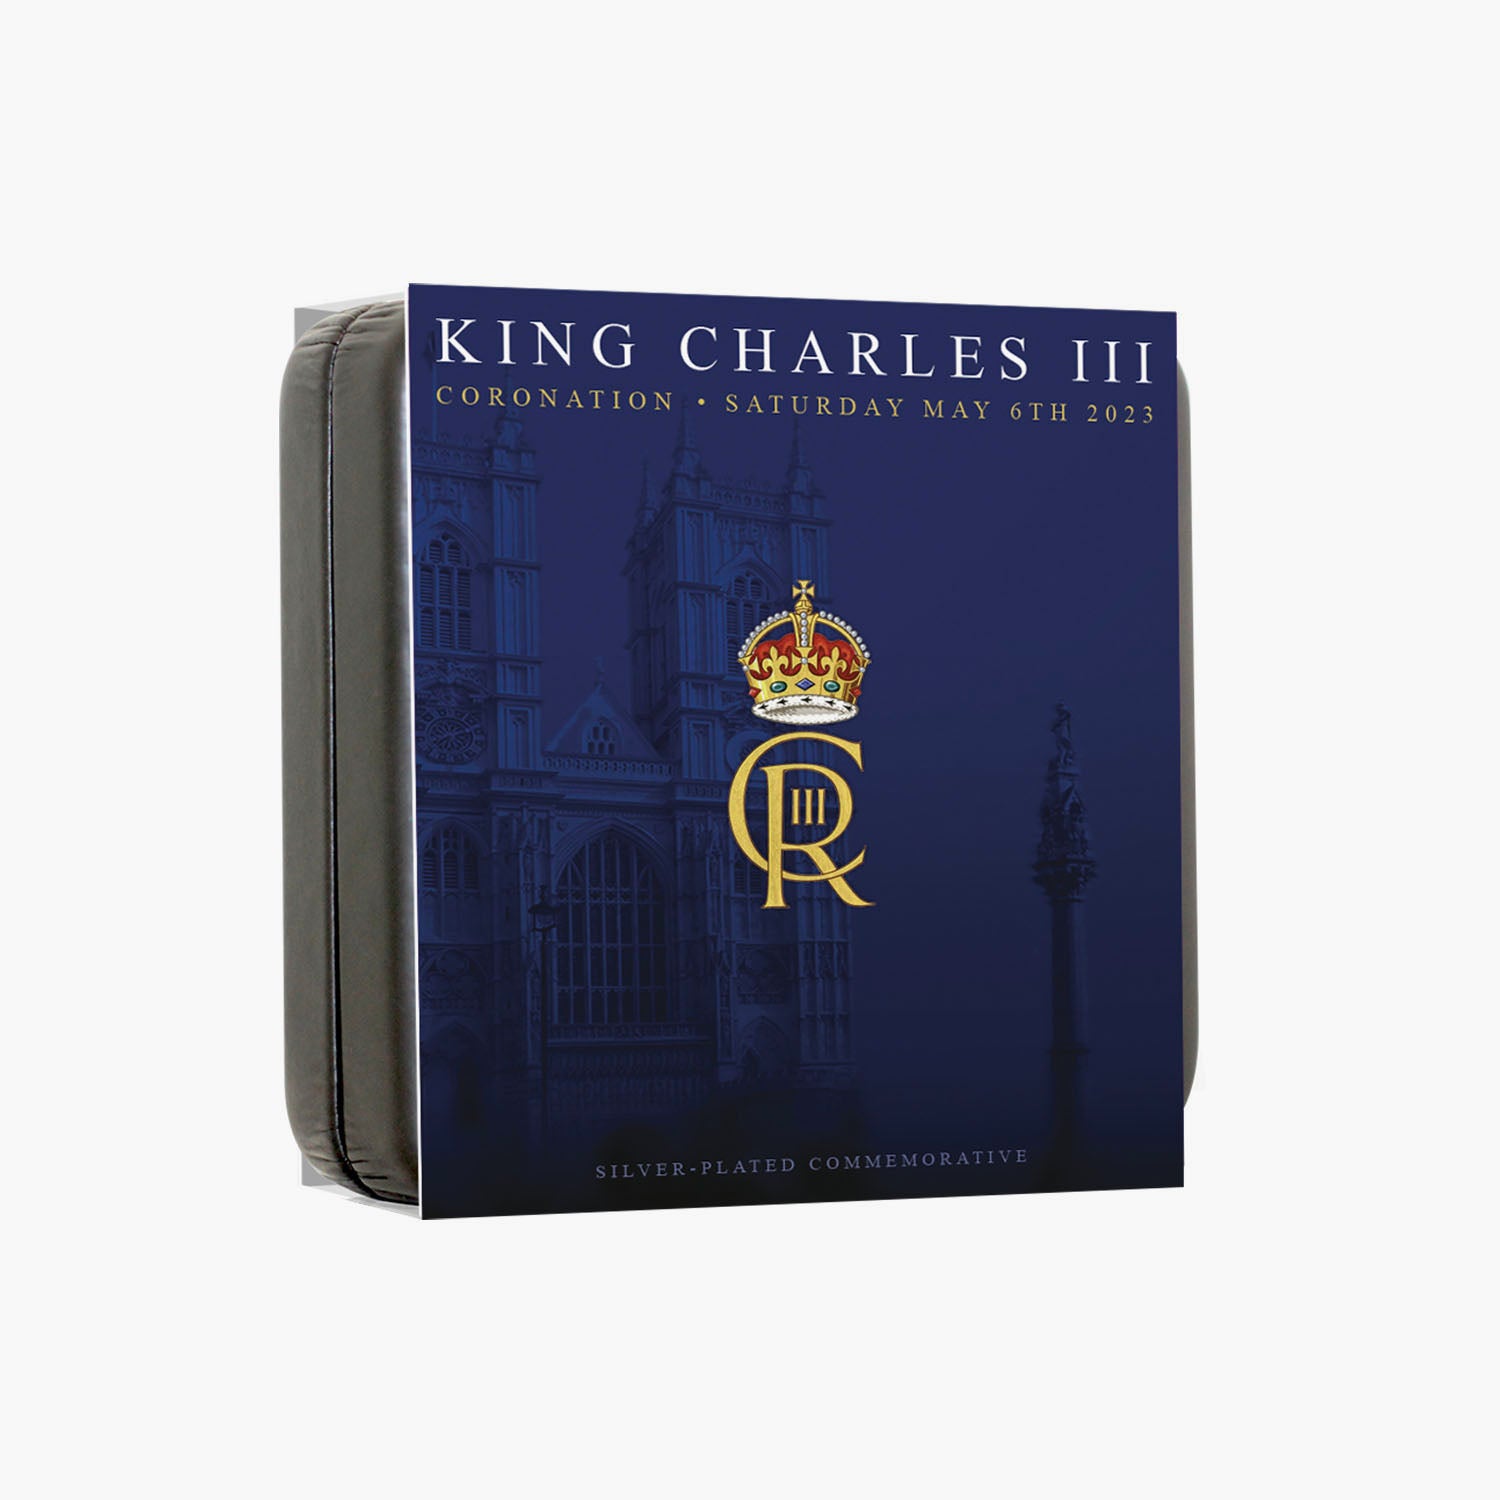 The Coronation of King Charles III Collectors Edition Commemorative